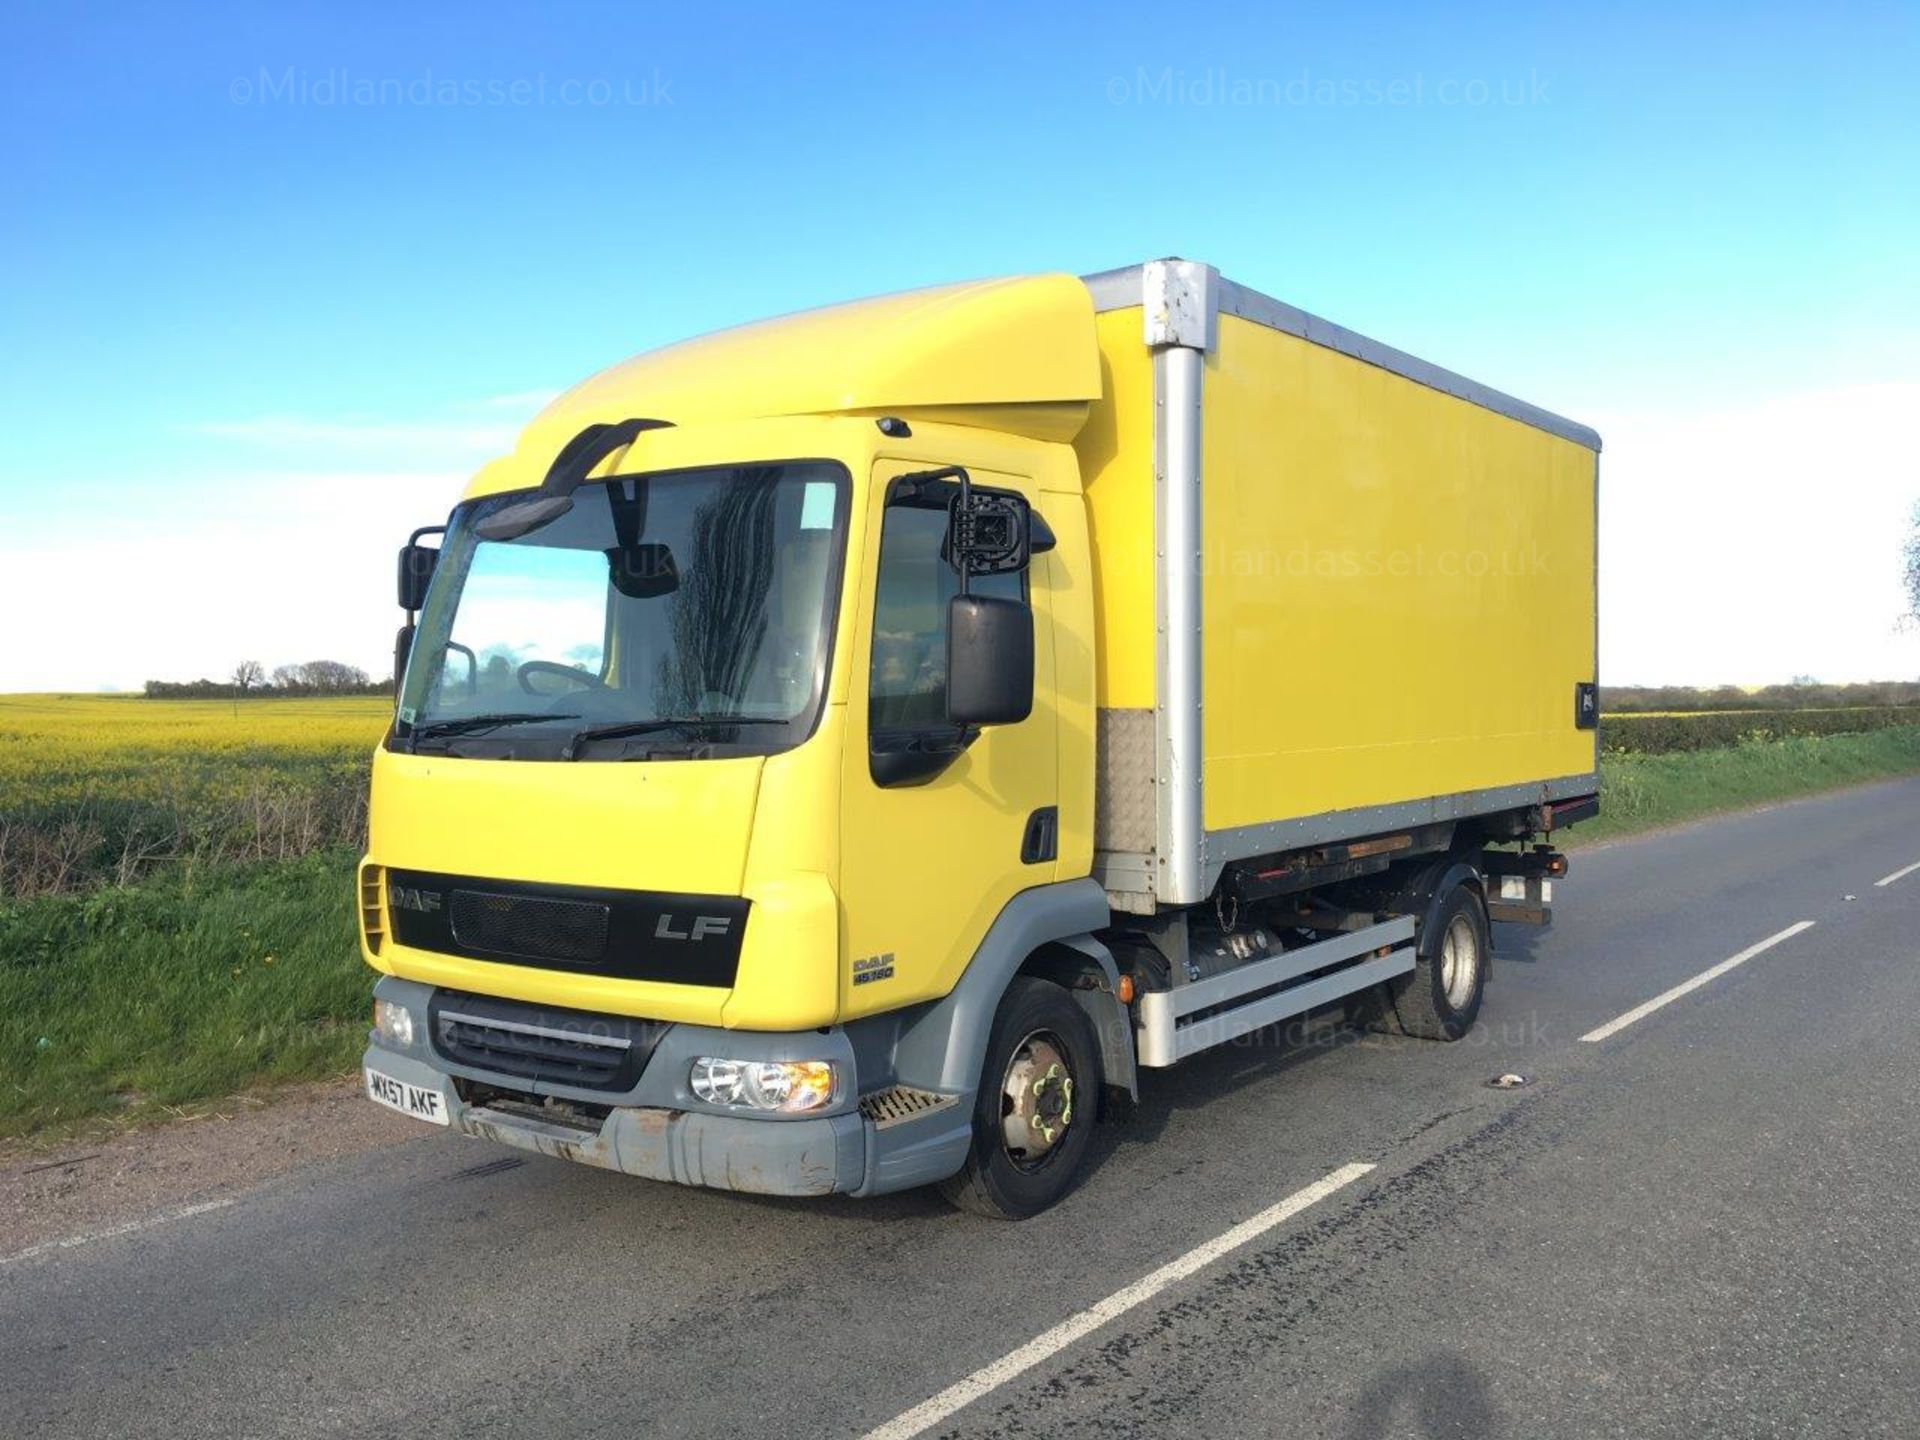 2007/57 REG DAF LF 45.160 16 FOOT BOX LORRY ONE OWNER - Image 2 of 7